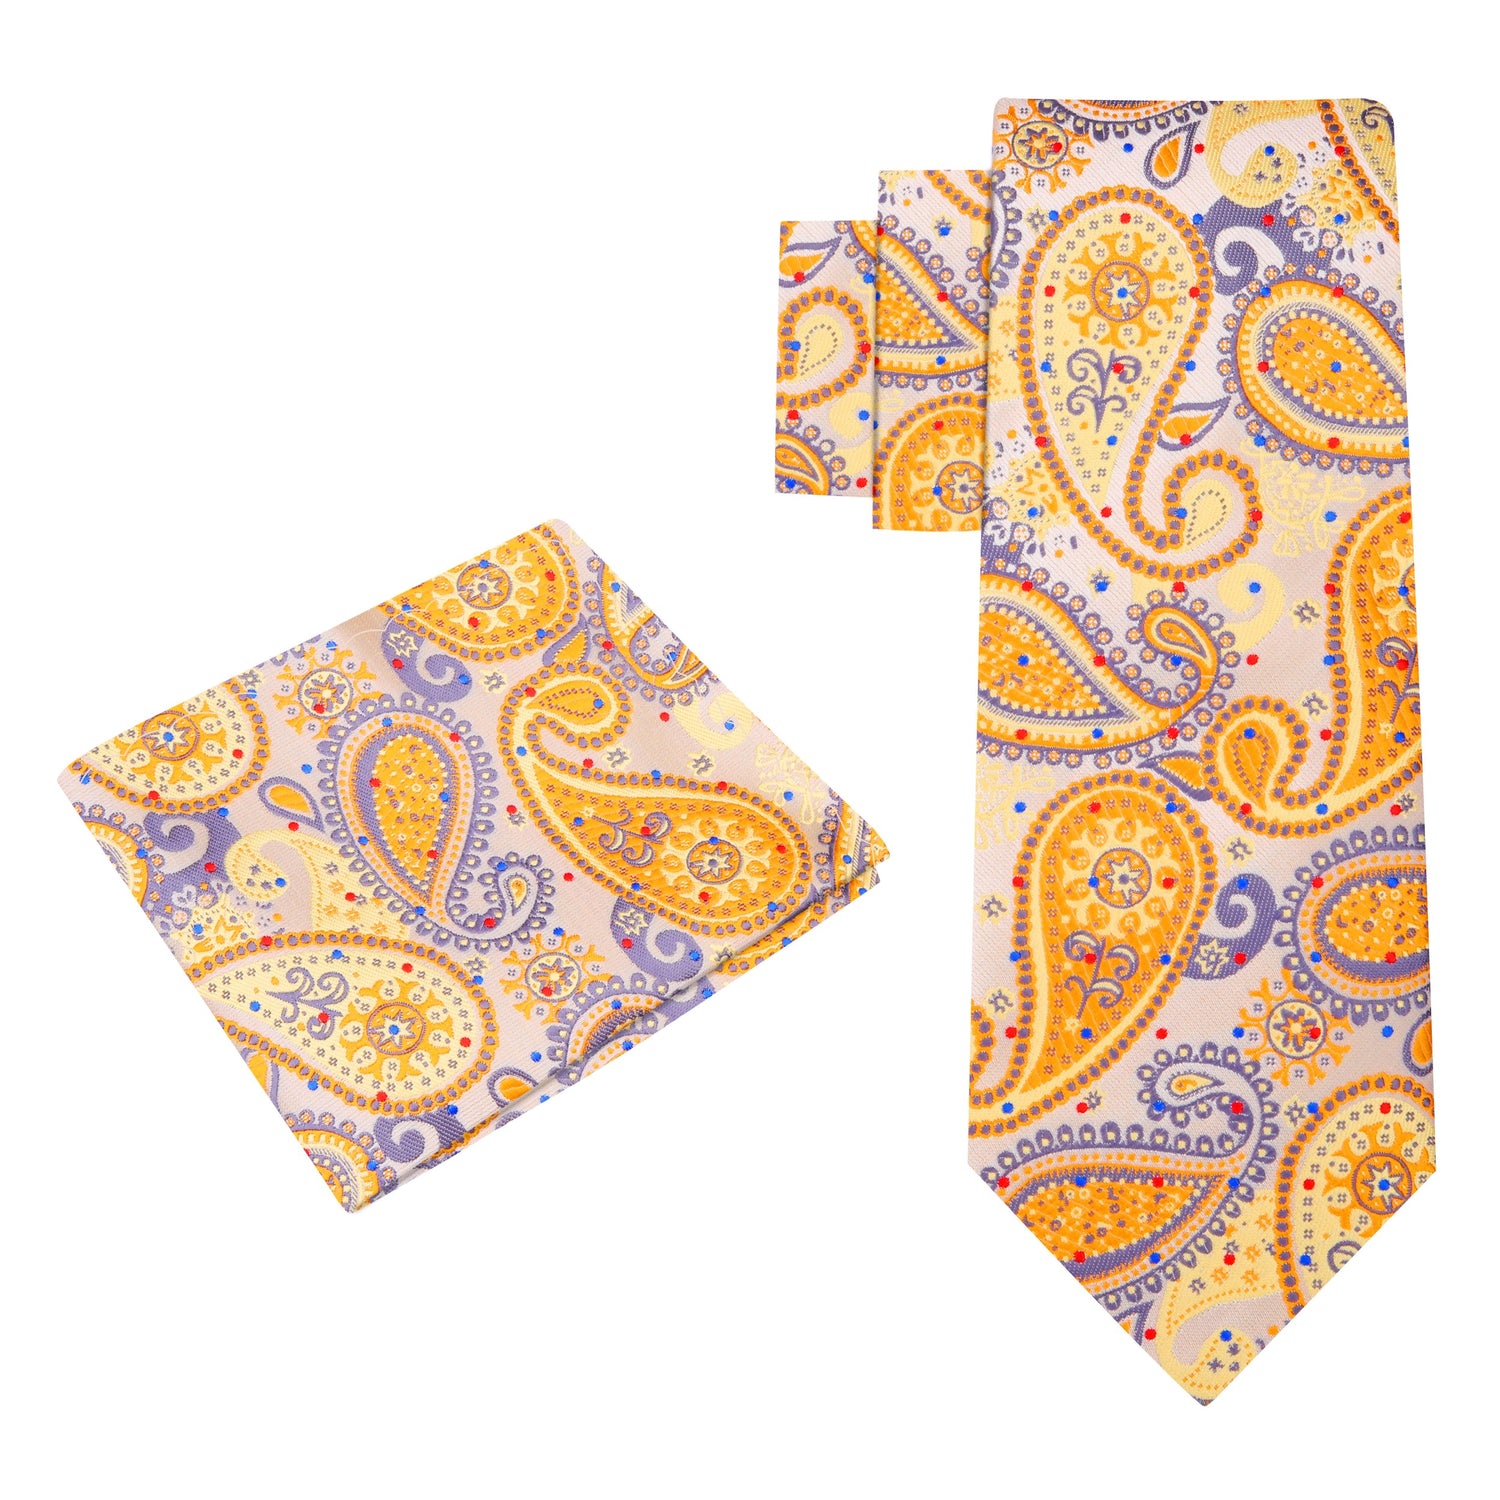 Alt View: A Cream, Yellow, Red, Blue Paisley Pattern Silk Necktie, Matching Pocket Square